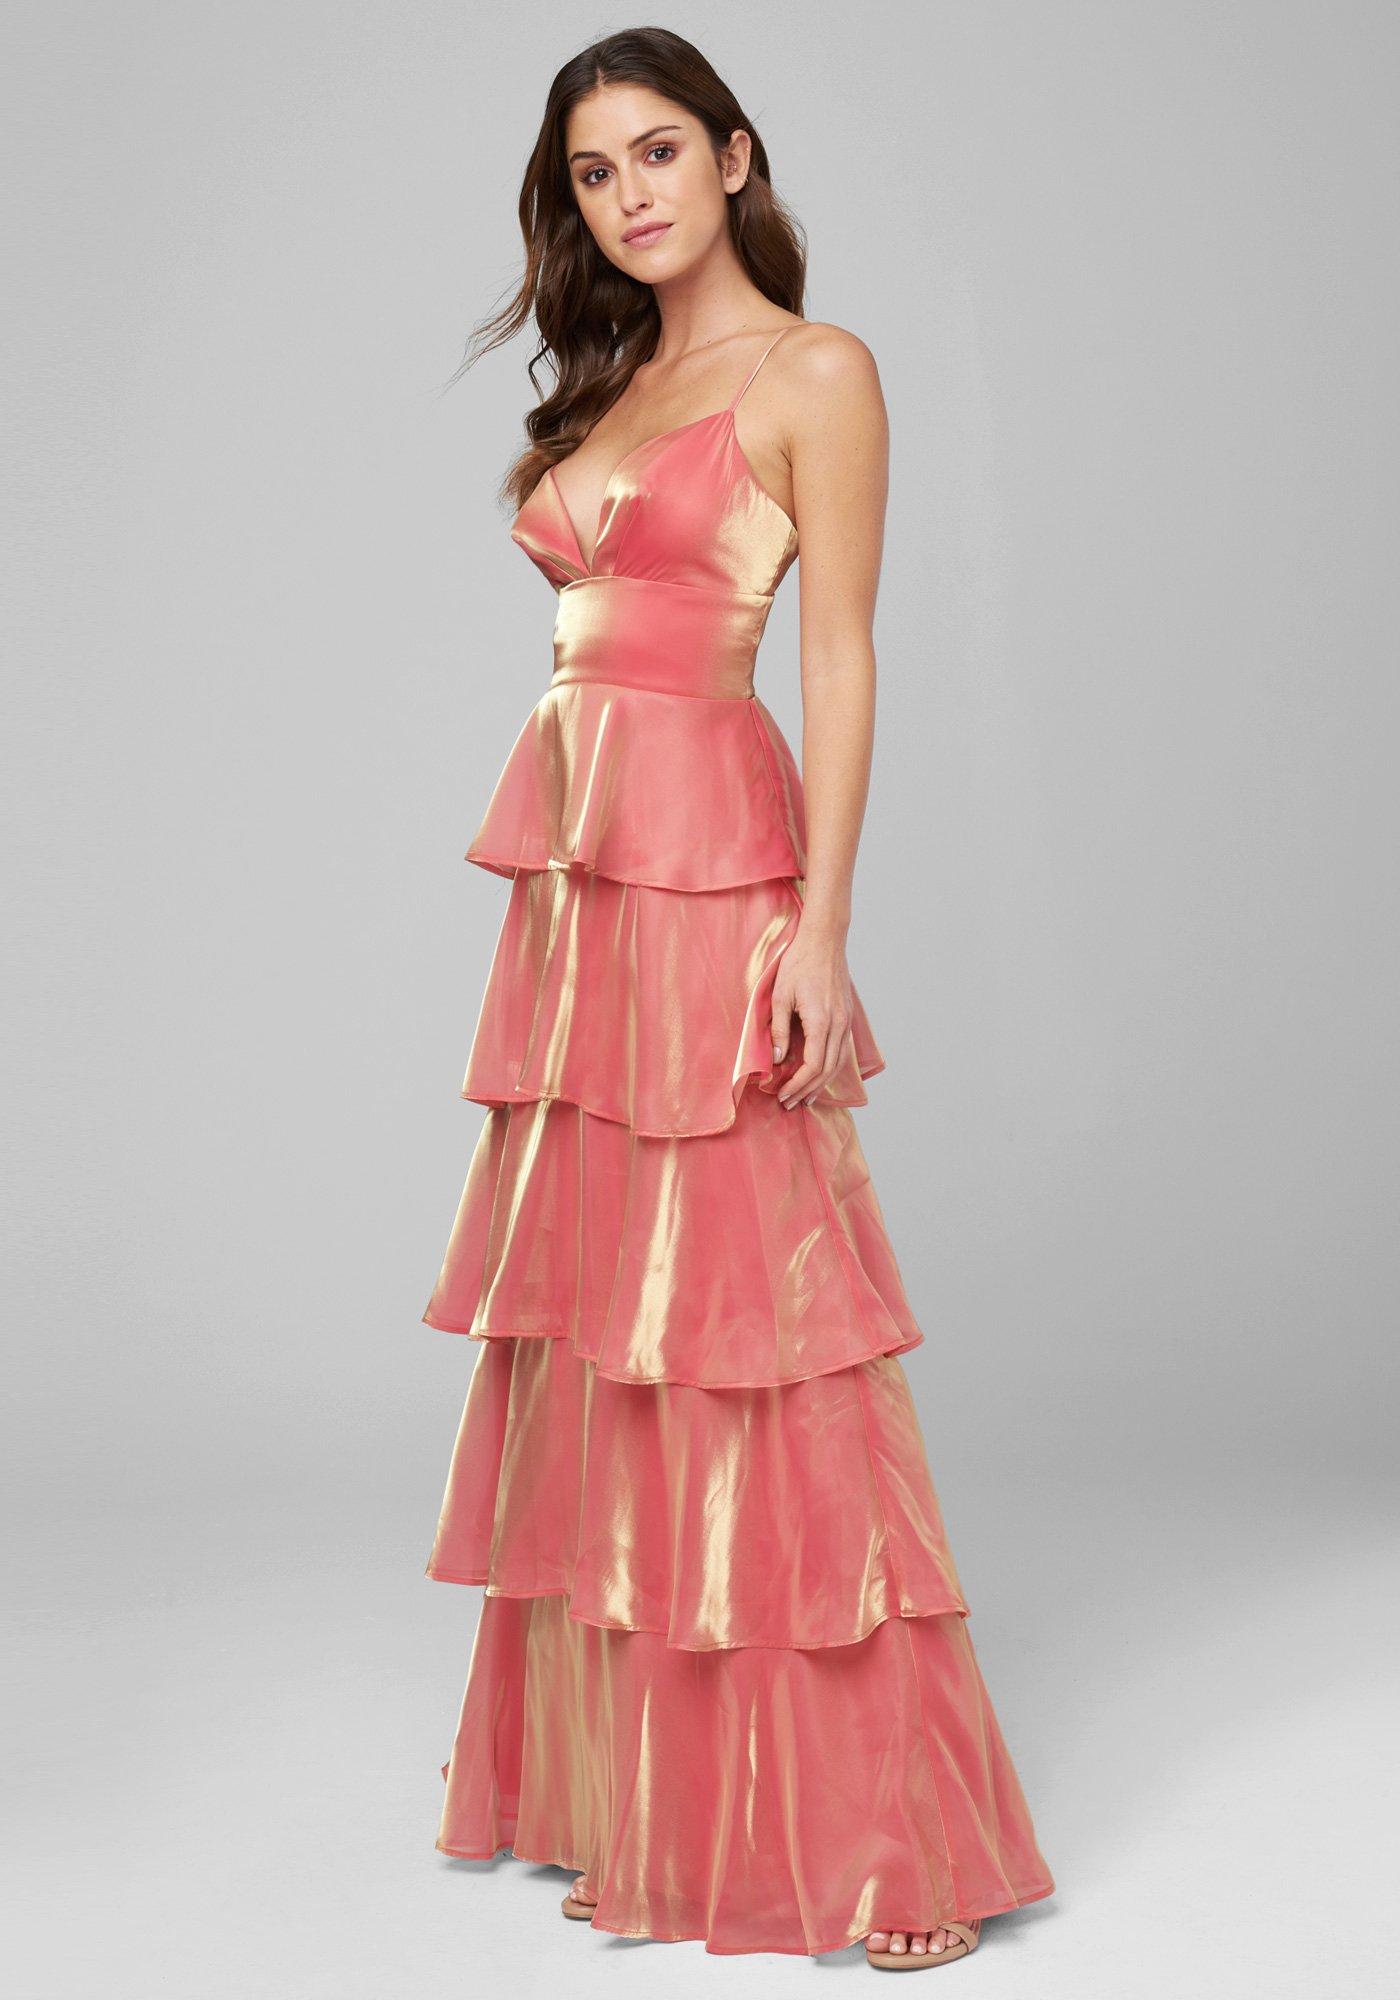 Bebe Synthetic Ruffle Tier Gown in Pink ...